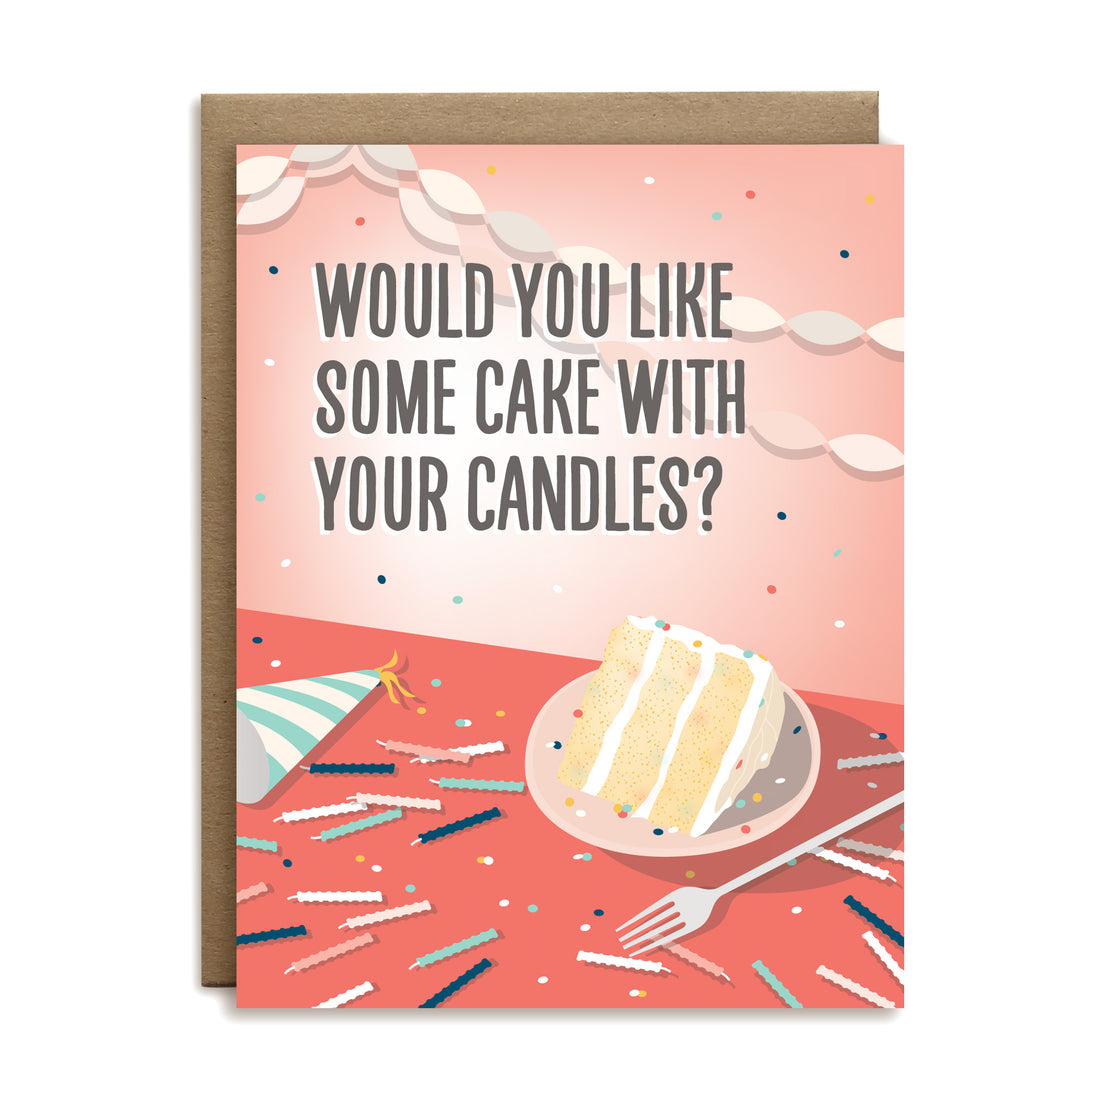 Would you like some cake with your candles birthday greeting card by I’ll Know It When I See It 